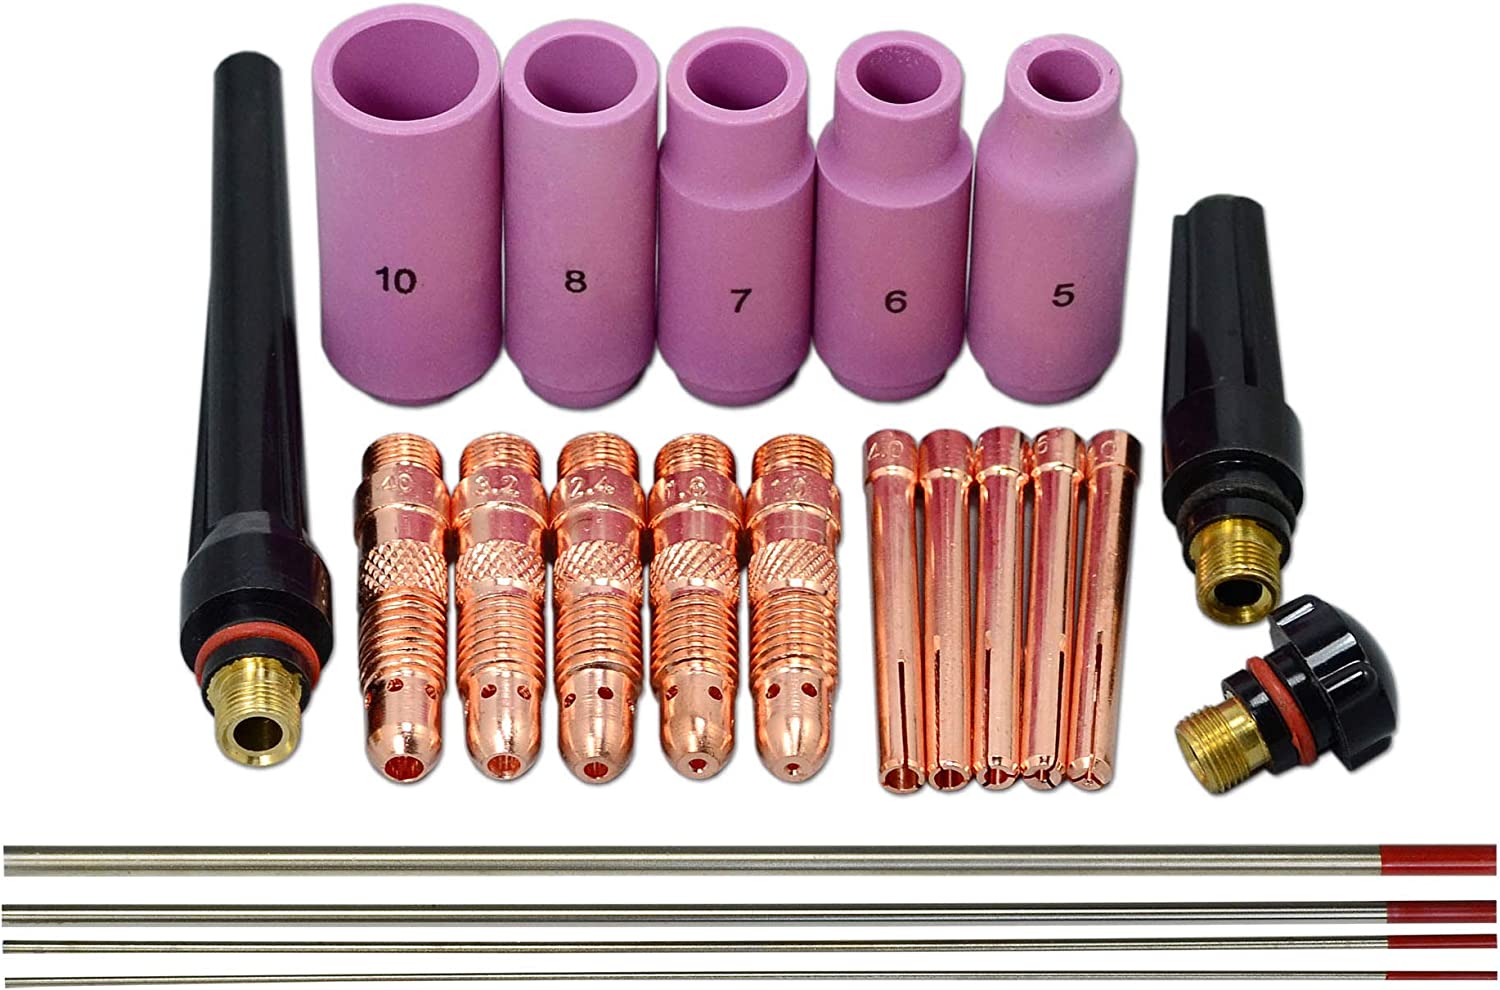 TIG Collet Body Back Cup 2 Percent Lanthanated Tungsten Electrode Fit QQ300 DB PTA SR WP CK 17 18 26 TIG Welding Torch 22pcs